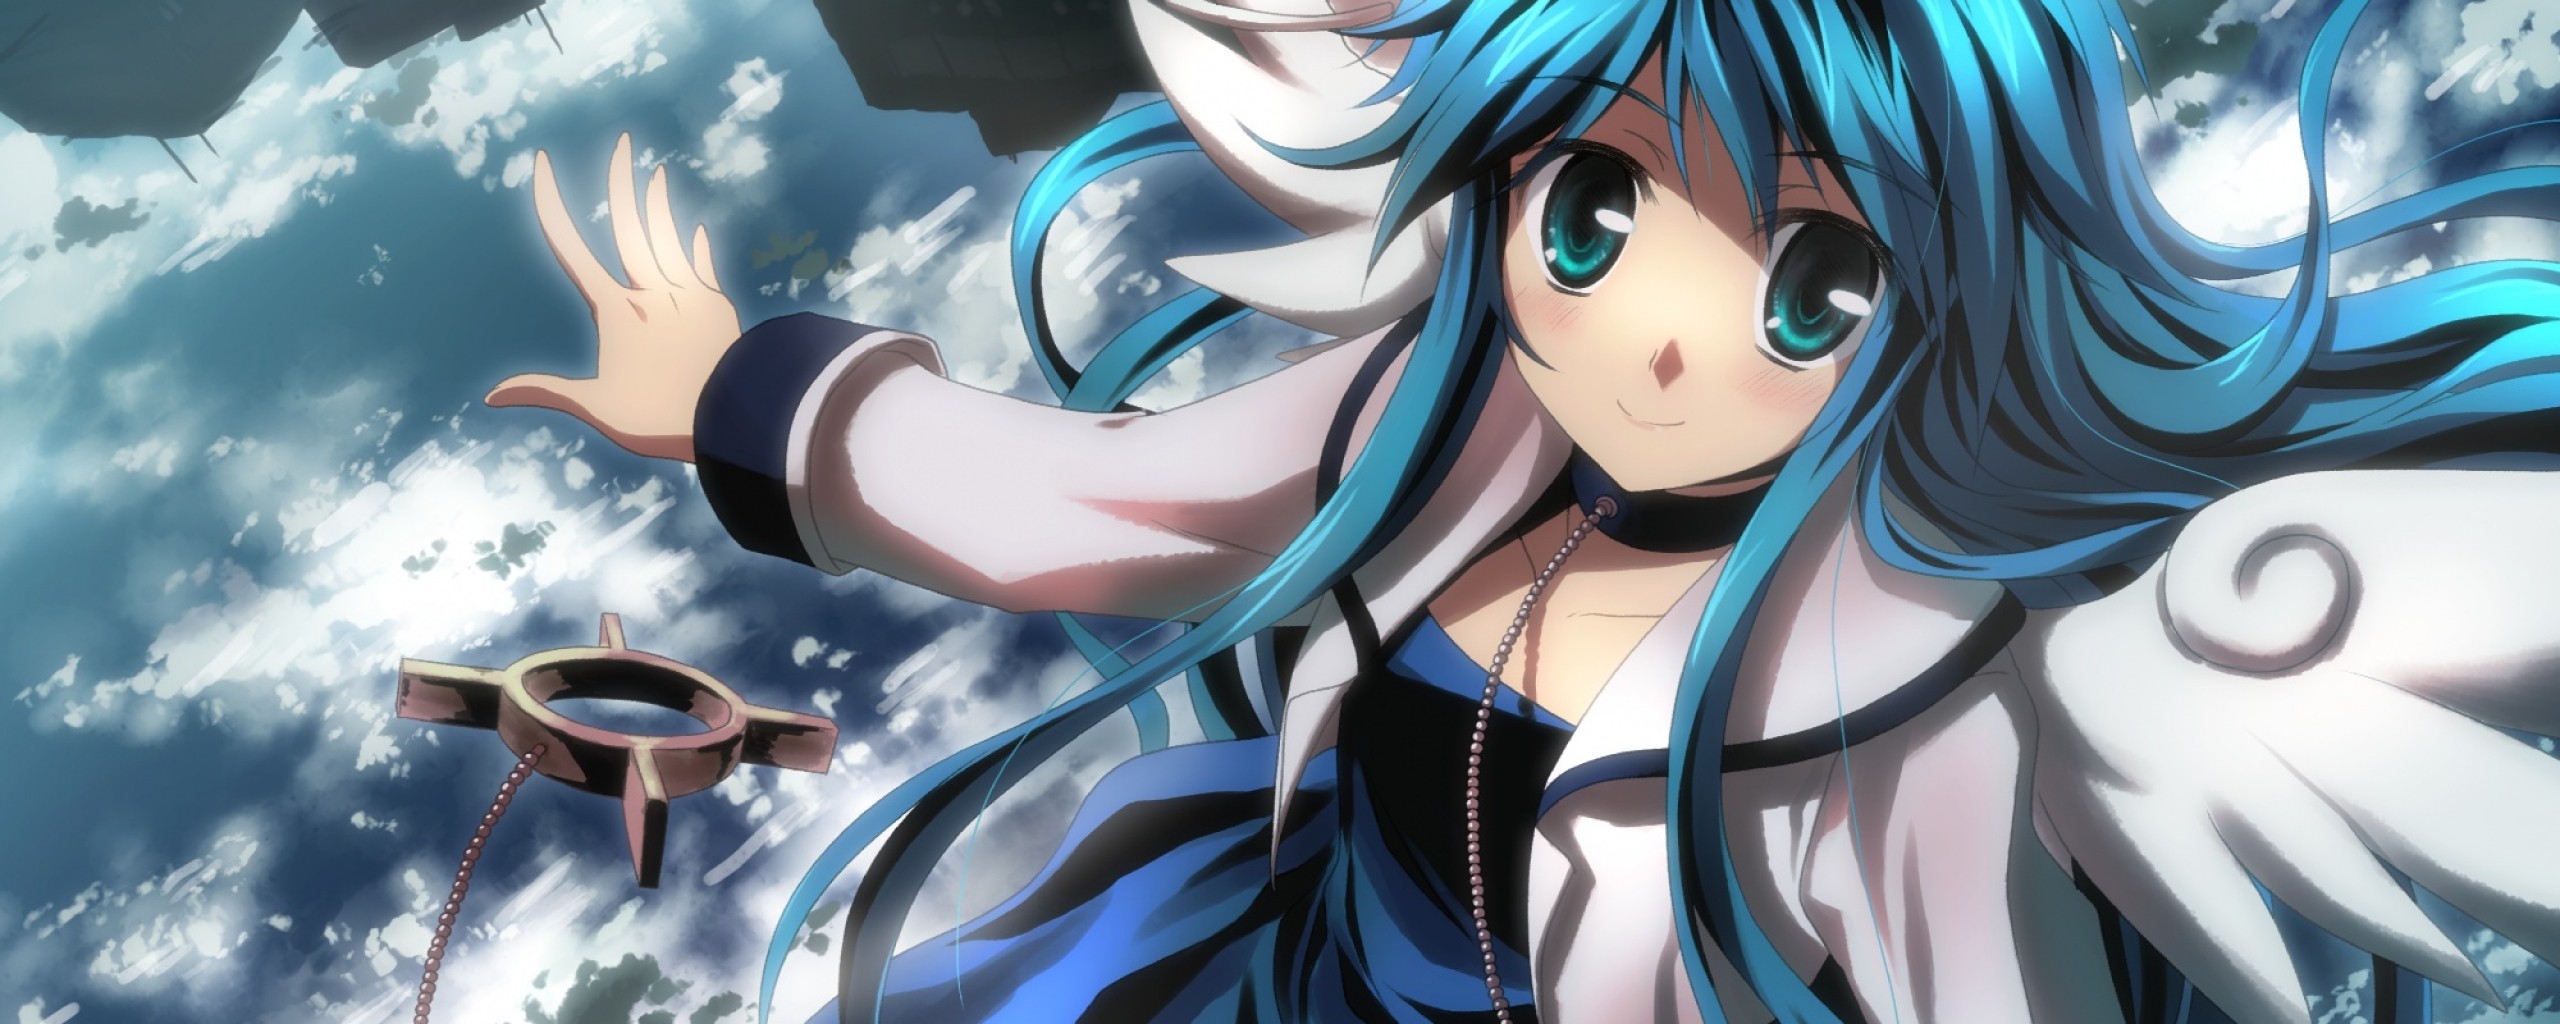 Anime Characters with Blue Hair Color - wide 1